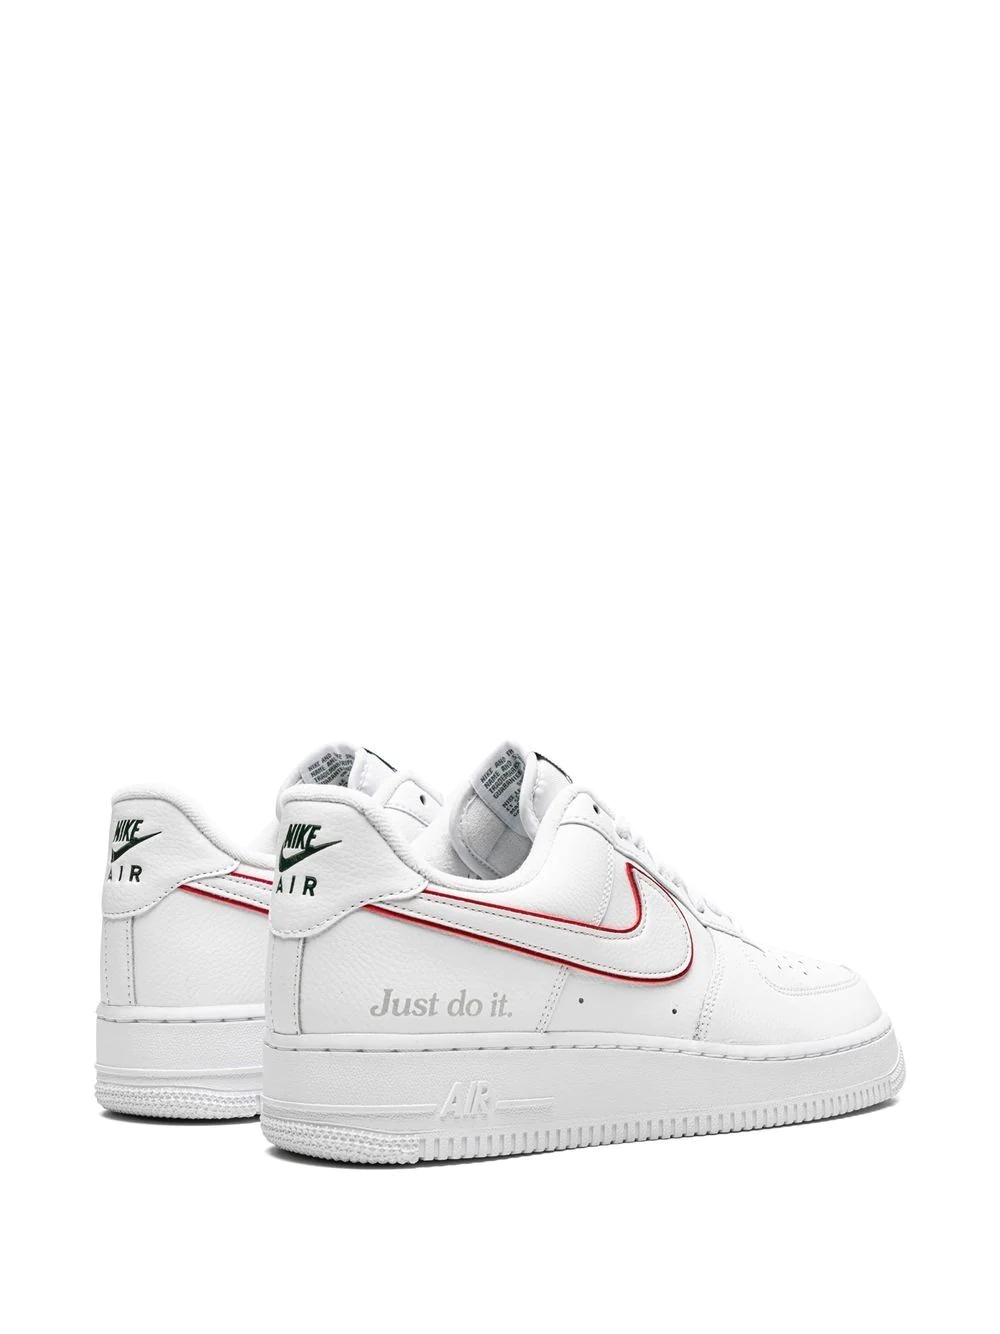 Air Force 1 "Just Do It" sneakers - 3